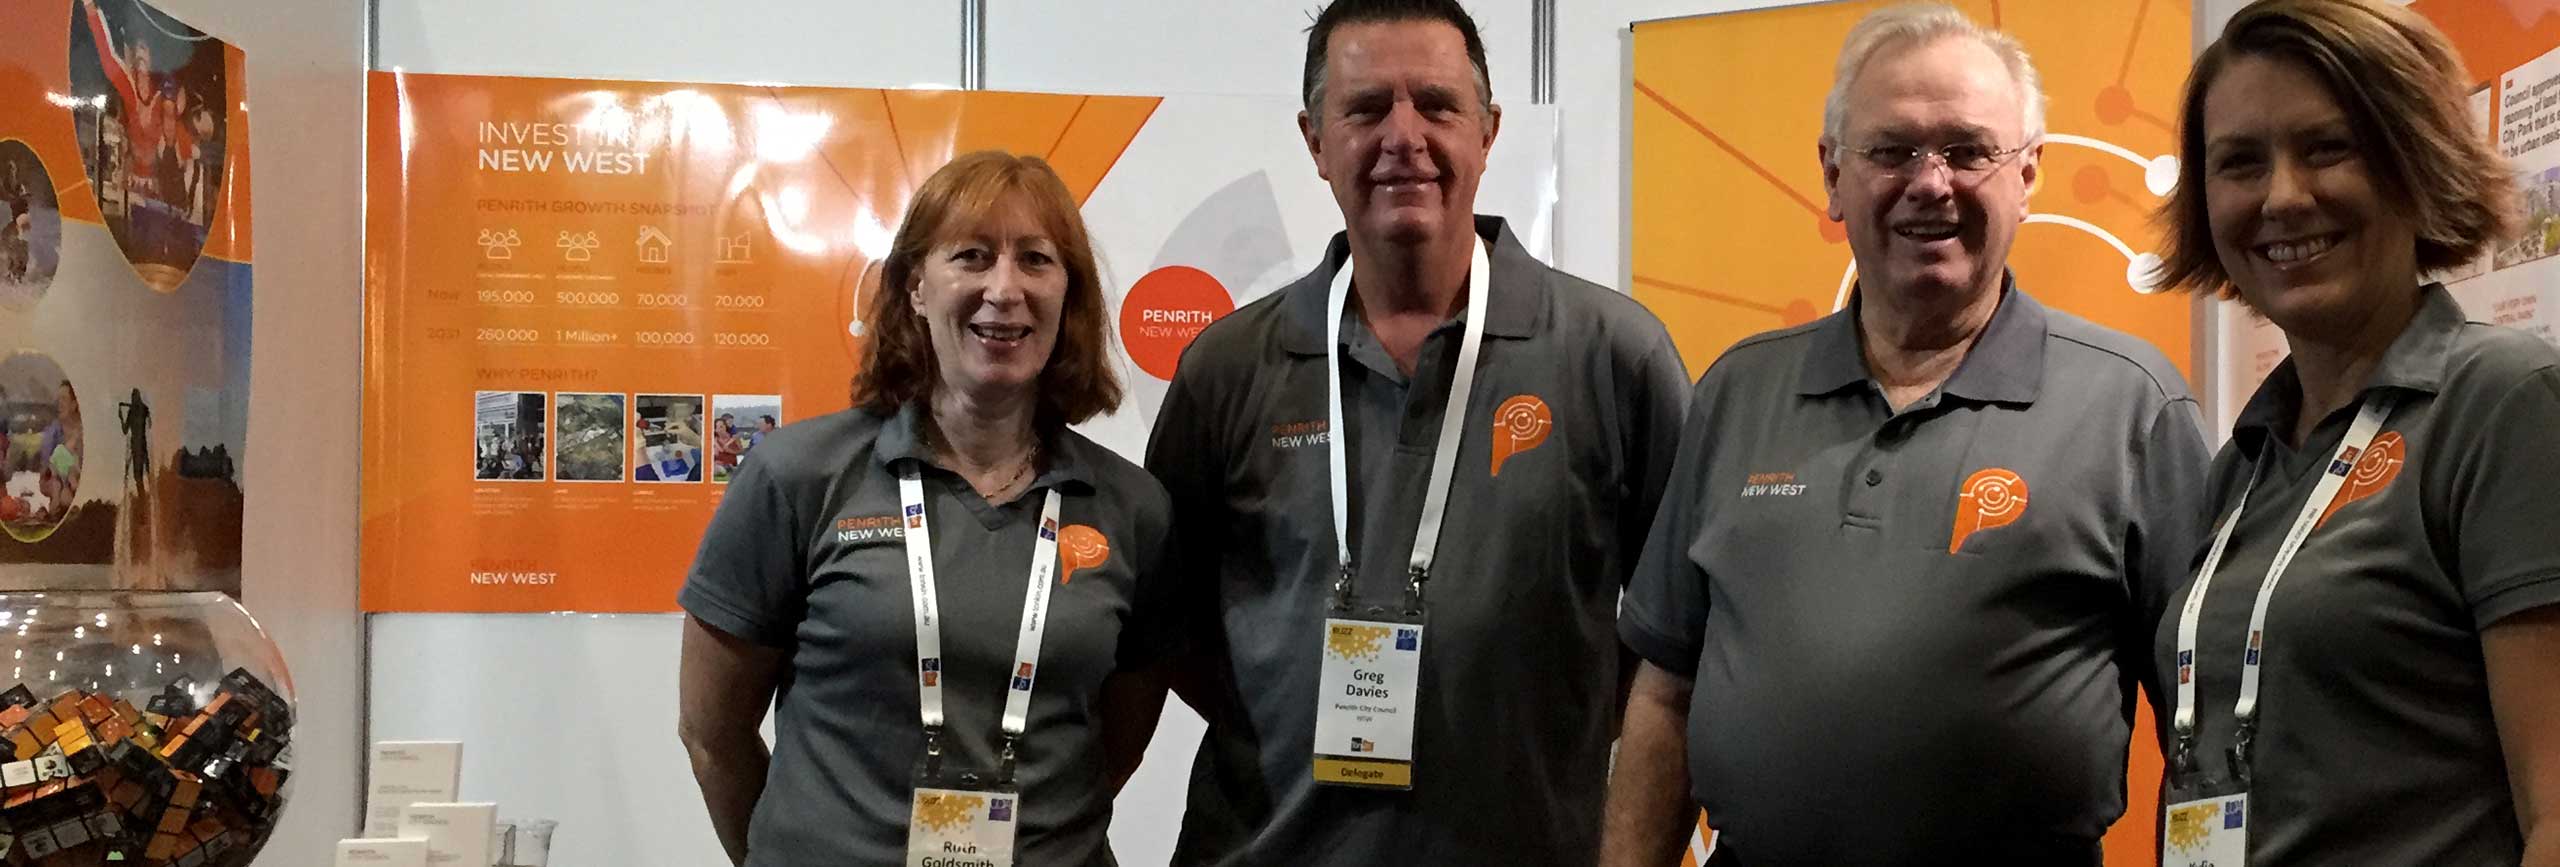 (L-R) Executive Manager City Planning & Community Ruth Goldsmith, Councillors Greg Davies and Jim Aitken OAM and Economic Initiatives Manager Kylie Powell are spreading the 'Invest in New West' message at the UDIA Congress.